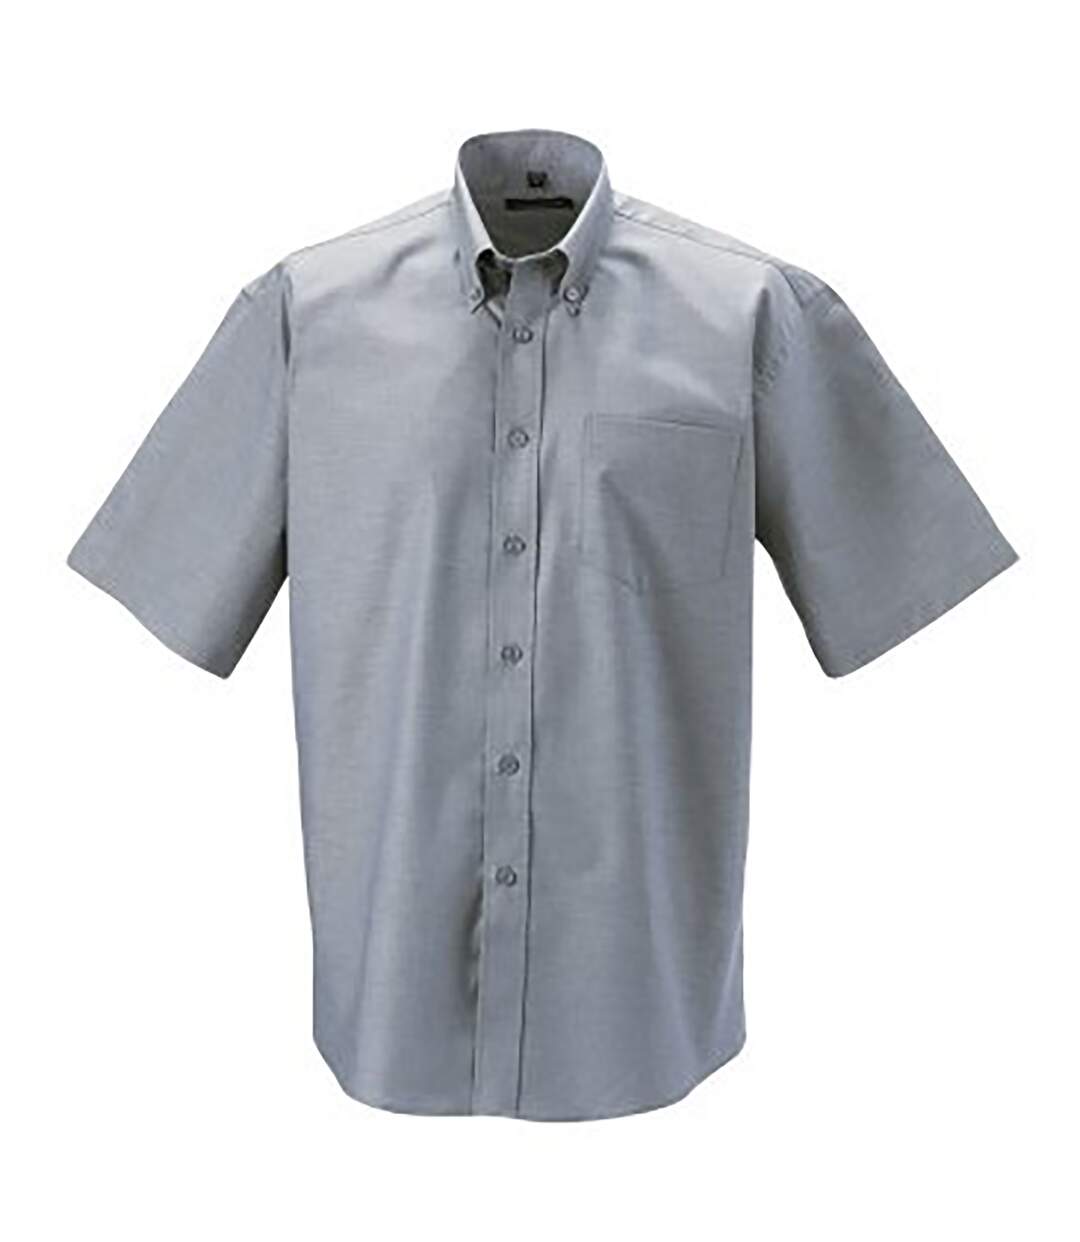 Russell Collection Mens Short Sleeve Easy Care Oxford Shirt (Silver Gray)